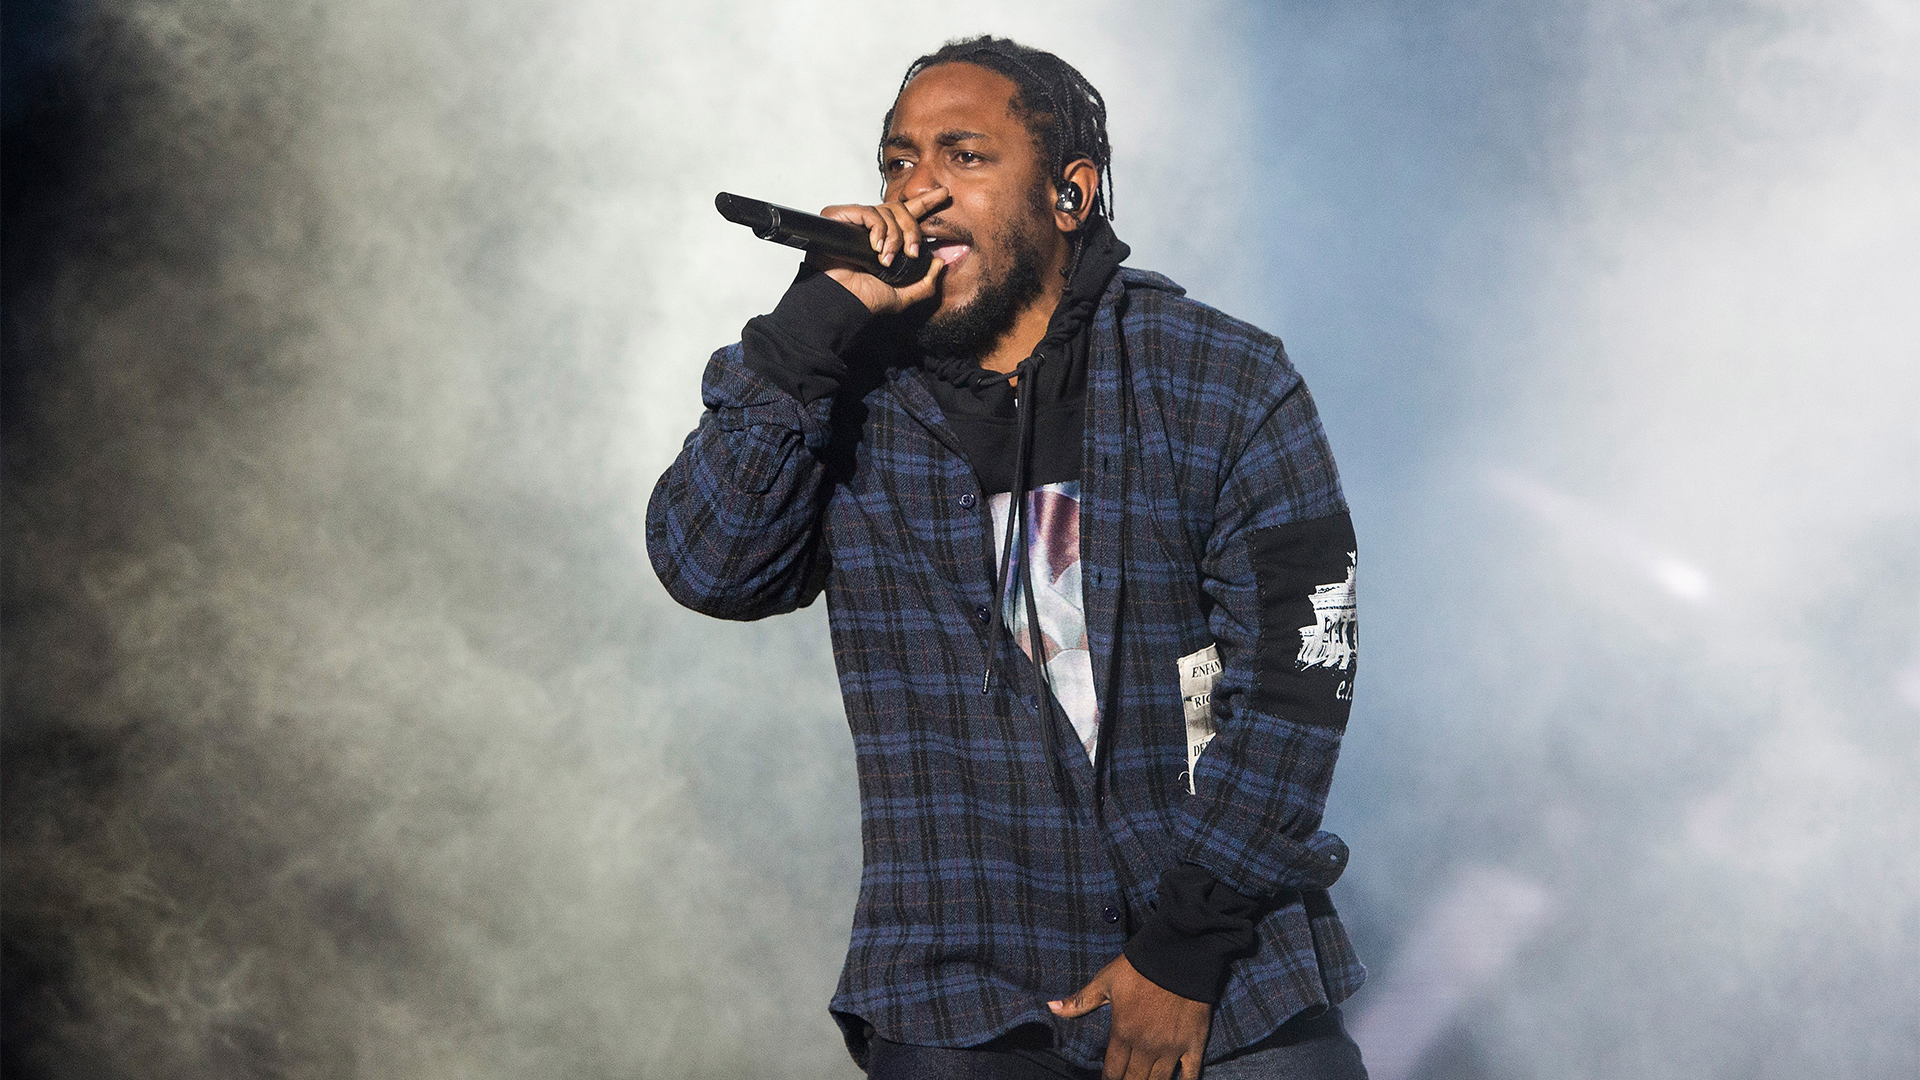 Kendrick Lamar Drops Album Release Date In A Quoted Tweet Of A Fan Claiming He's 'Officially Retired'